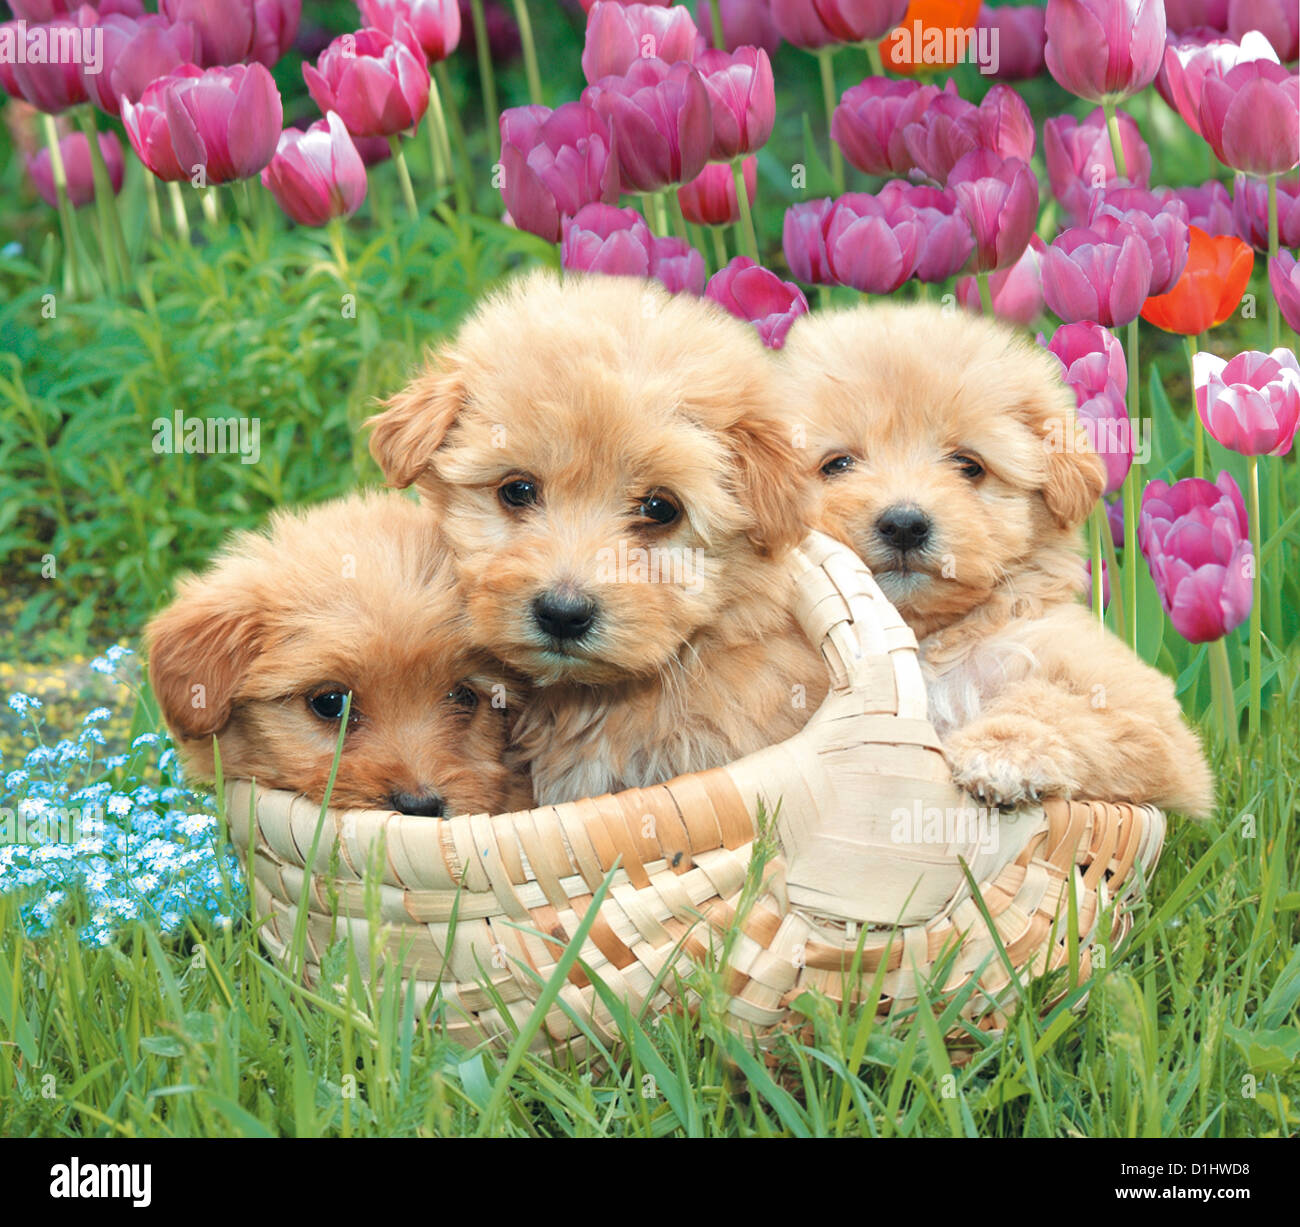 Young Cute Puppies In The Flowers Stock Photo Alamy